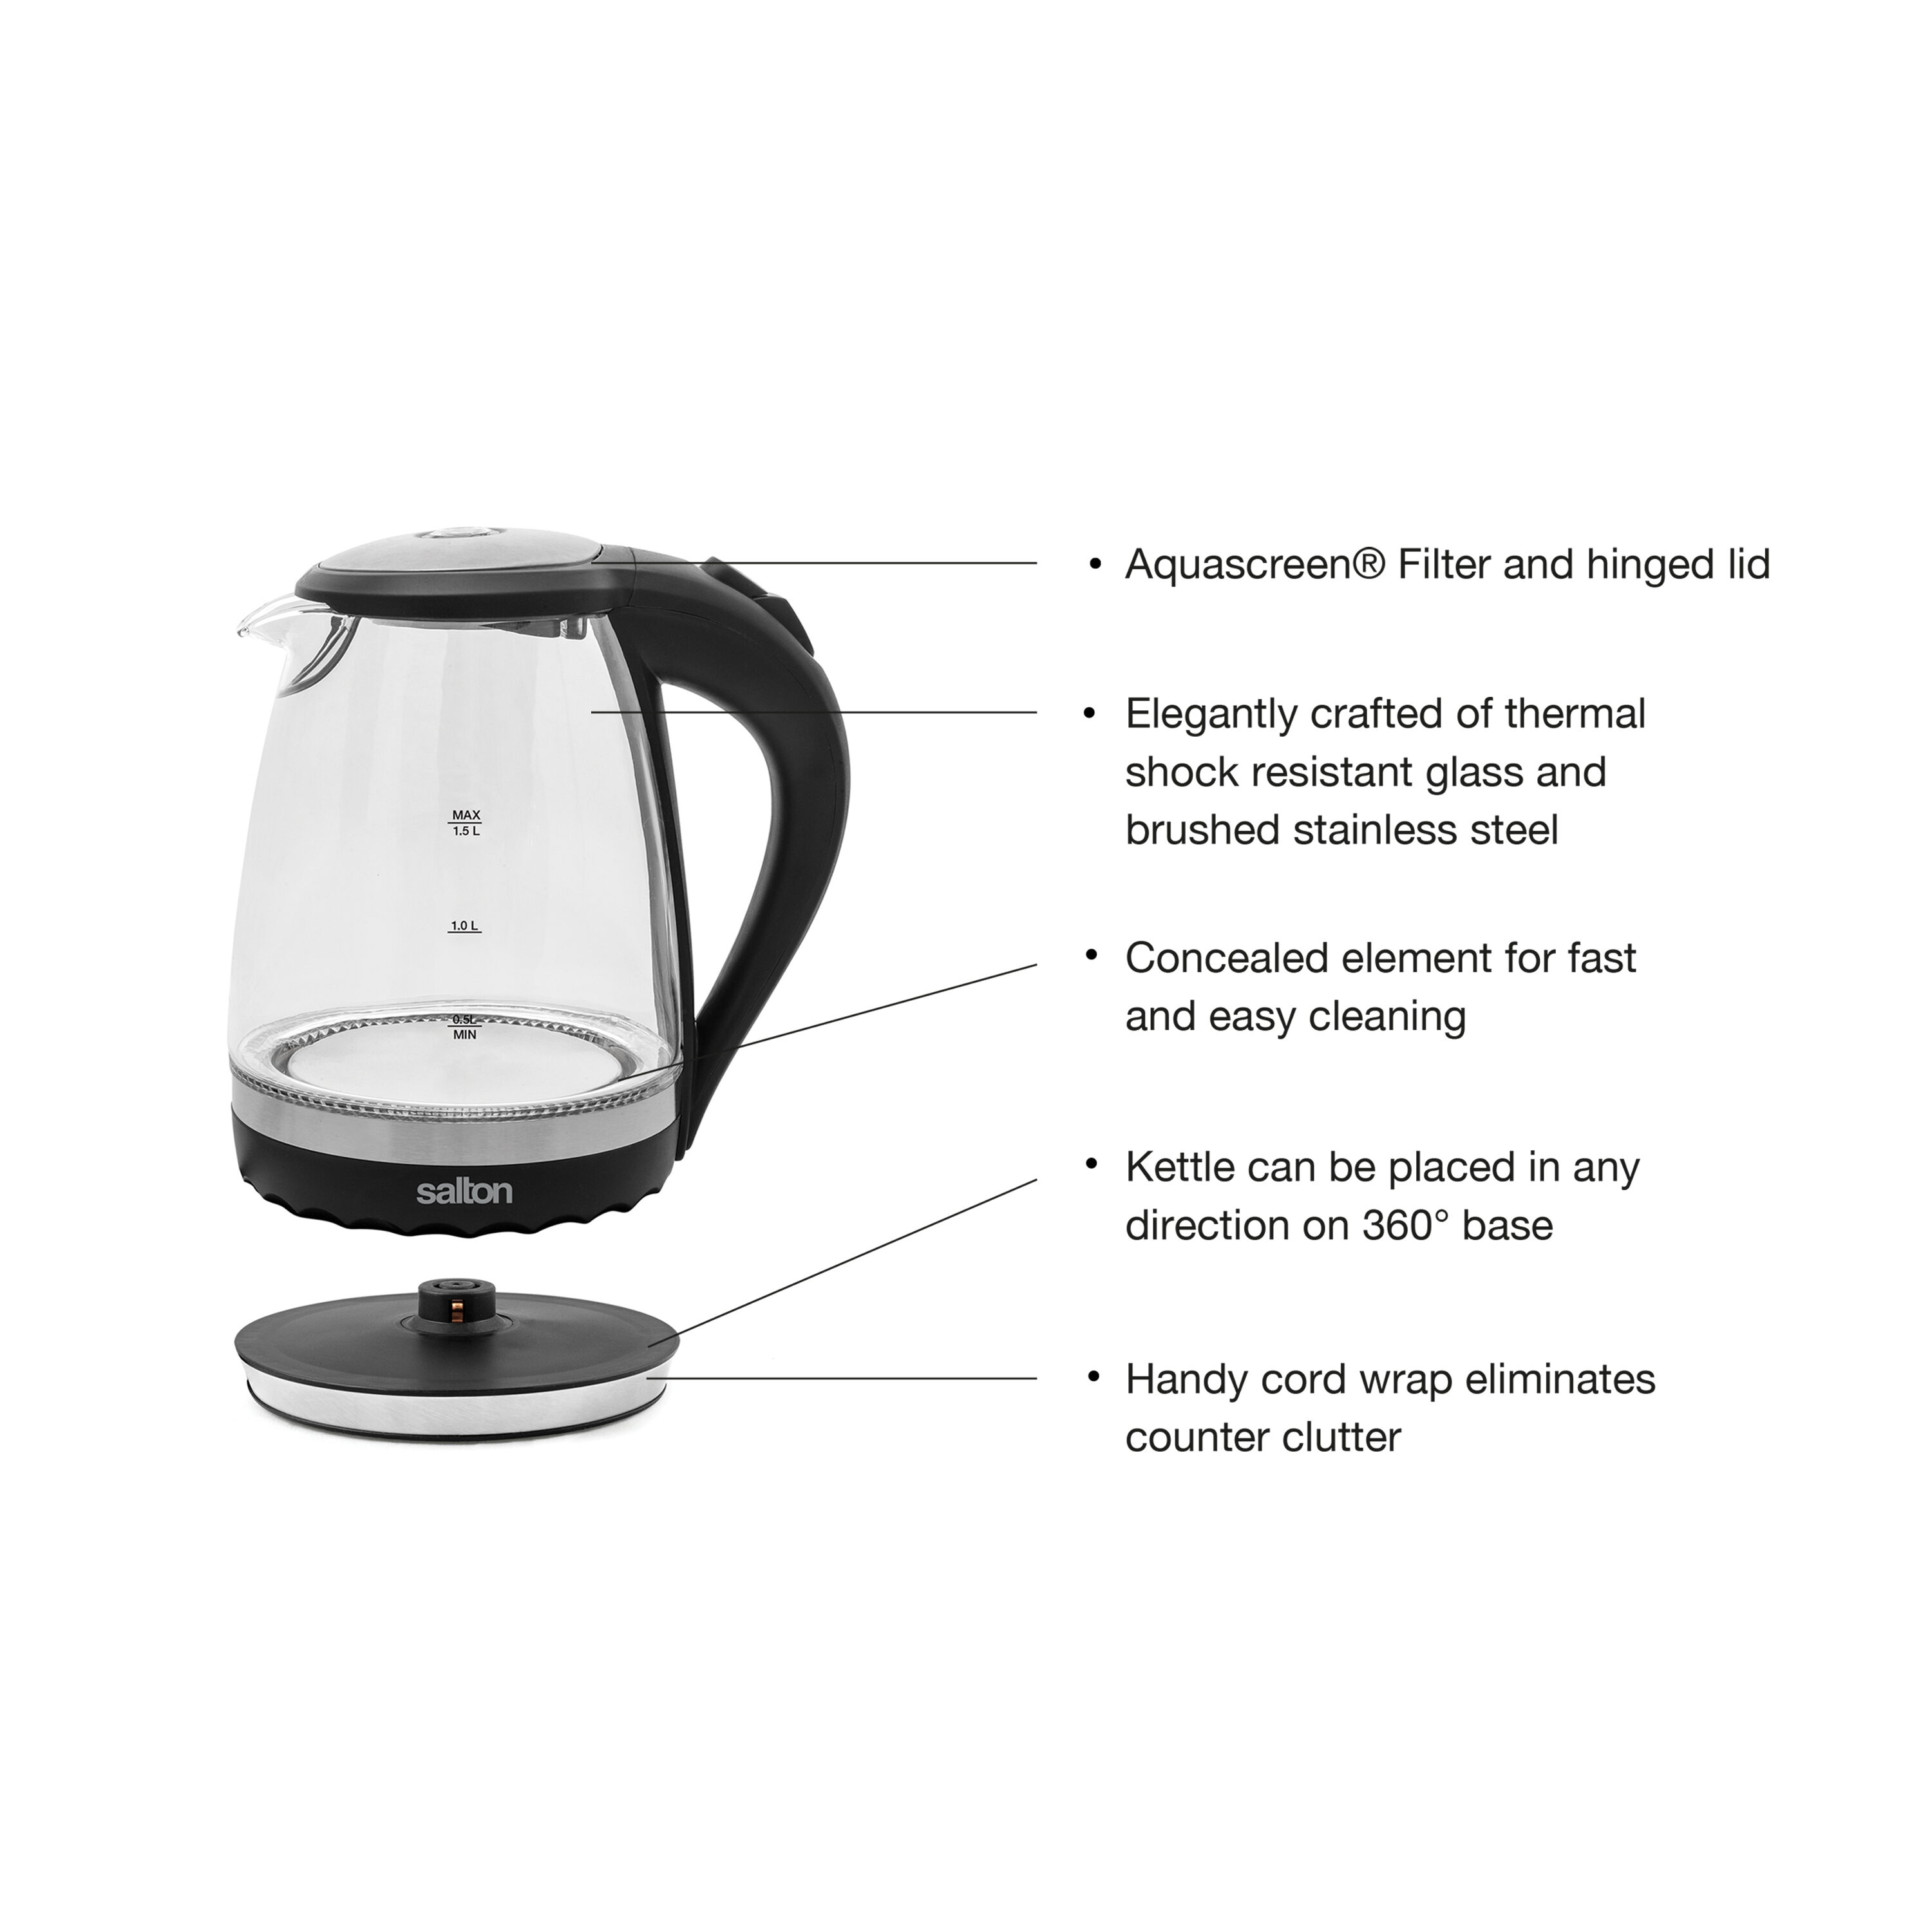 Retro Electric Kettle Temperature Control 1.8L Large Capacity with Watch  Stainless Steel Smart Electric Kettles (Color : Cream Color, Size : USA)